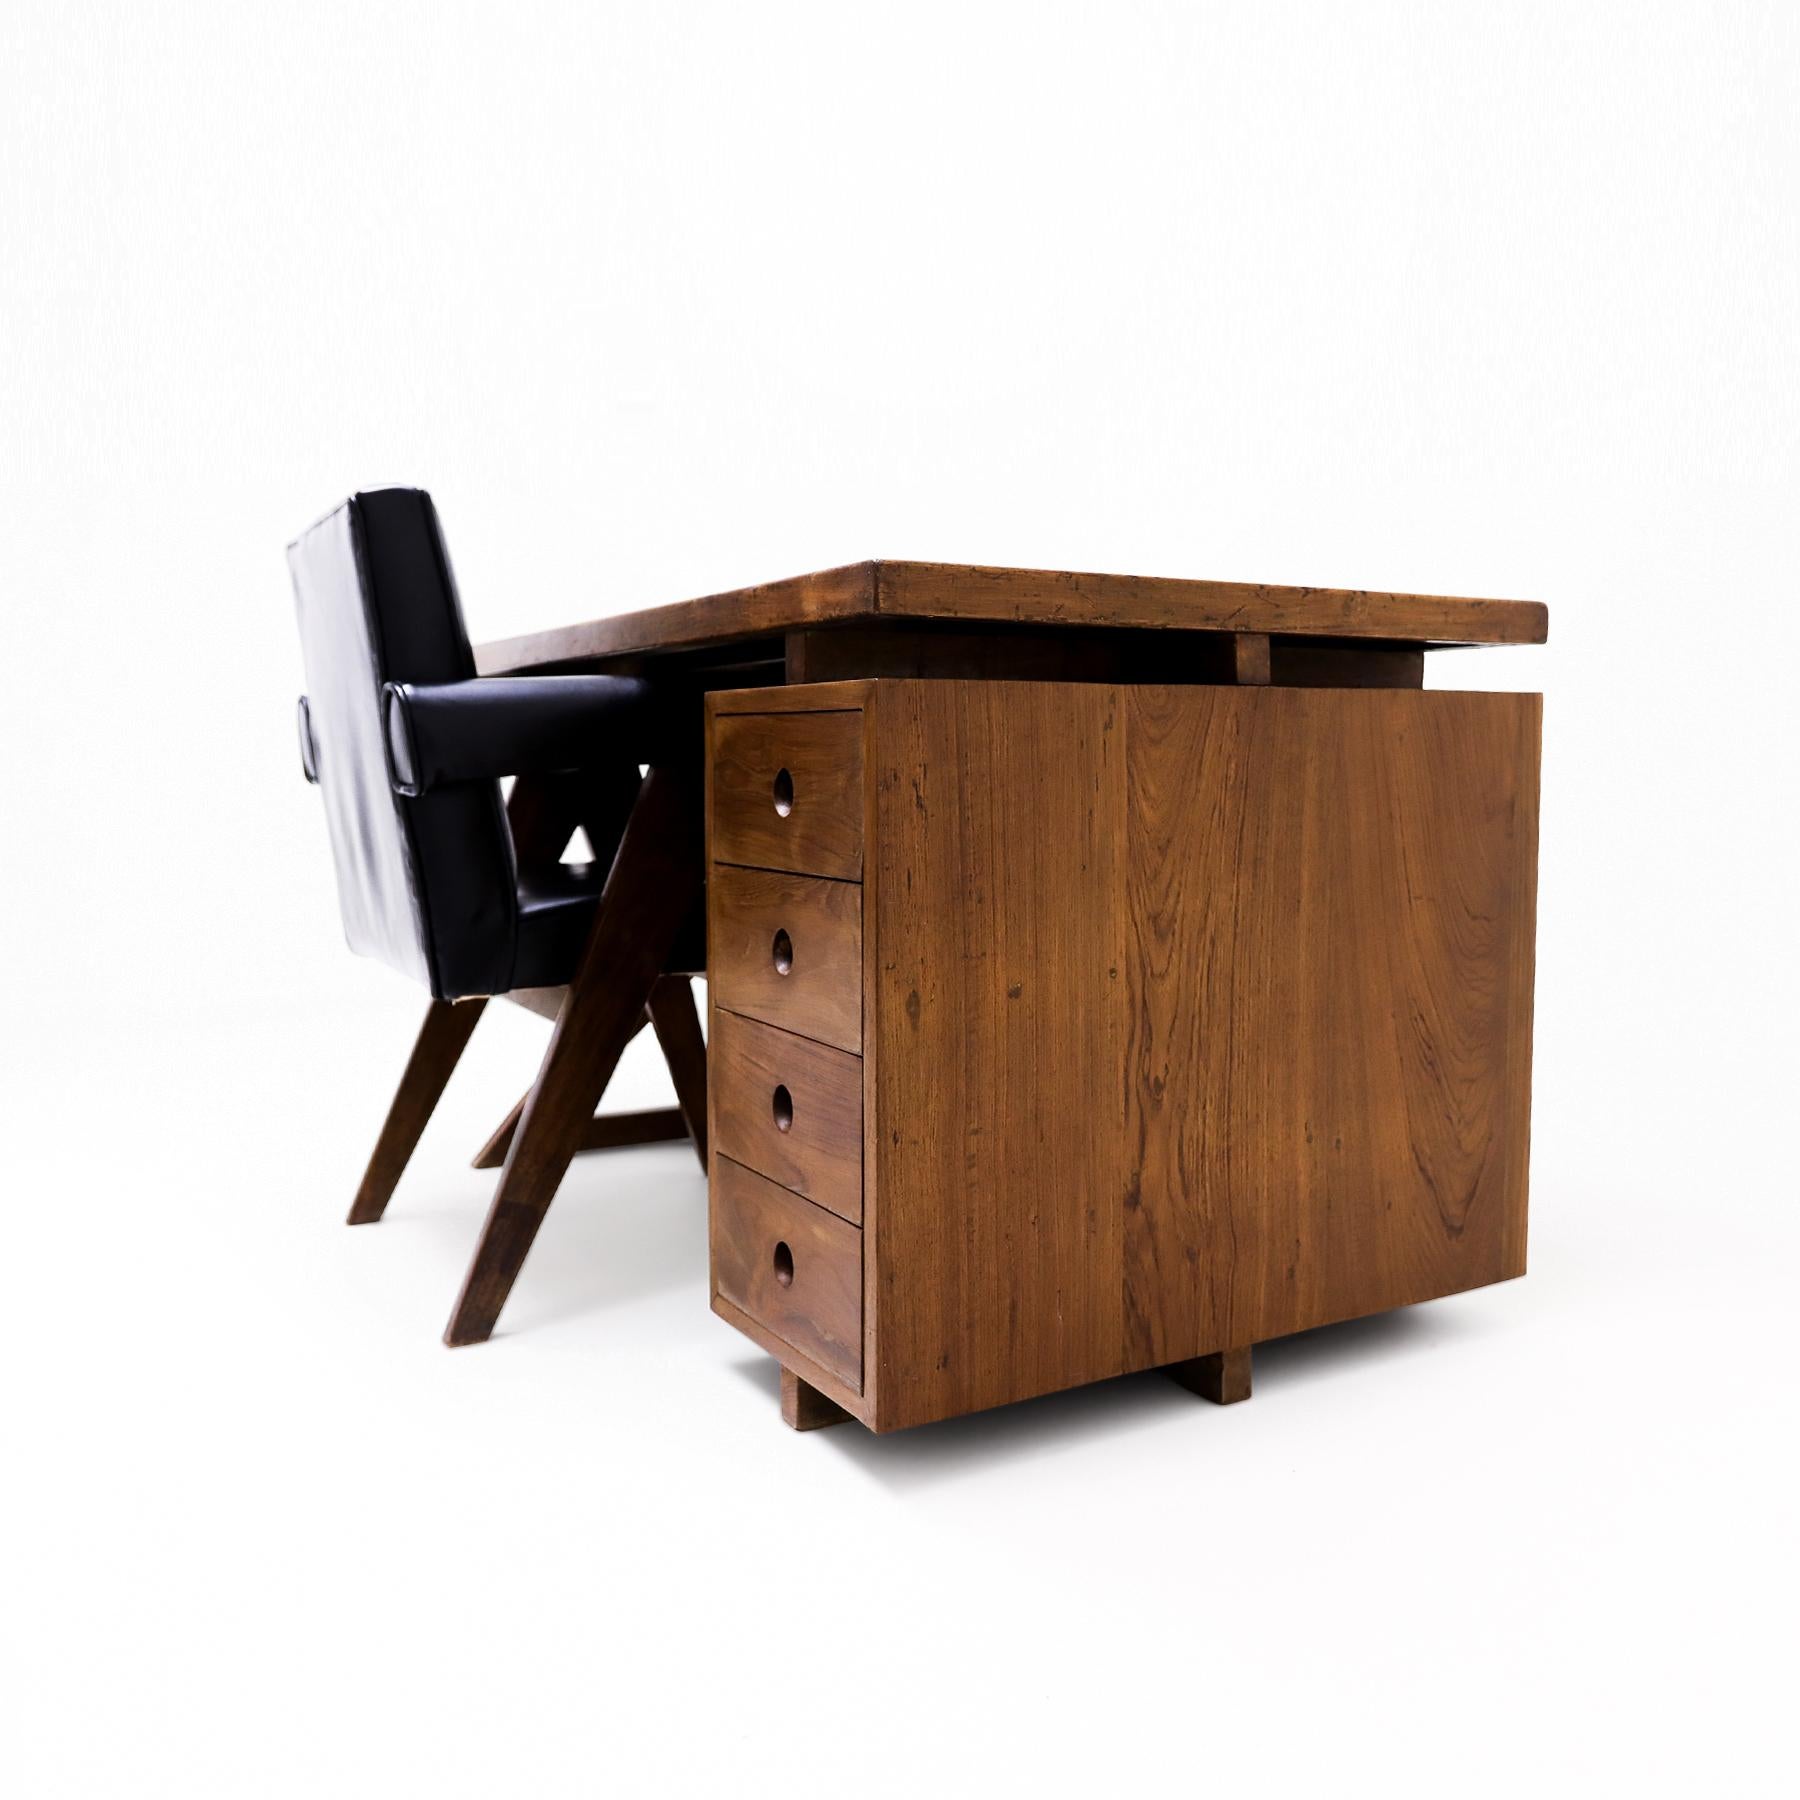 Indian Pierre Jeanneret  X desk with a Model Pj Si 30A Committee Chair, Chandigarh, 60s For Sale